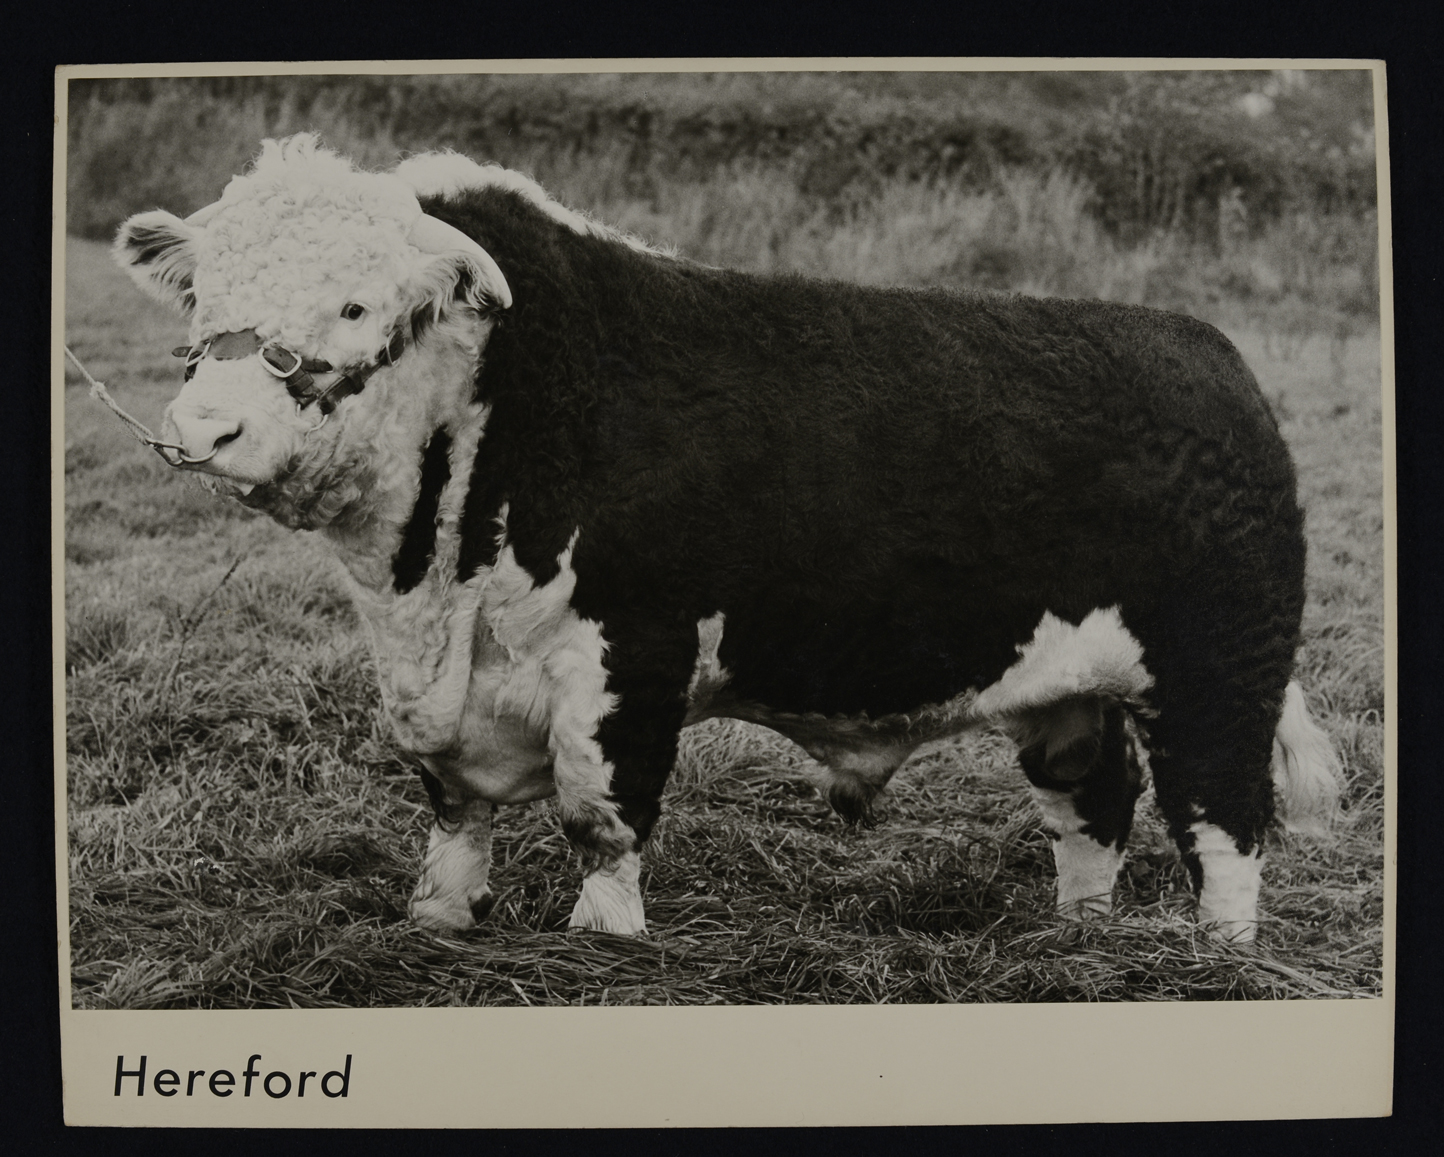 A black and white photograph of a large bull.